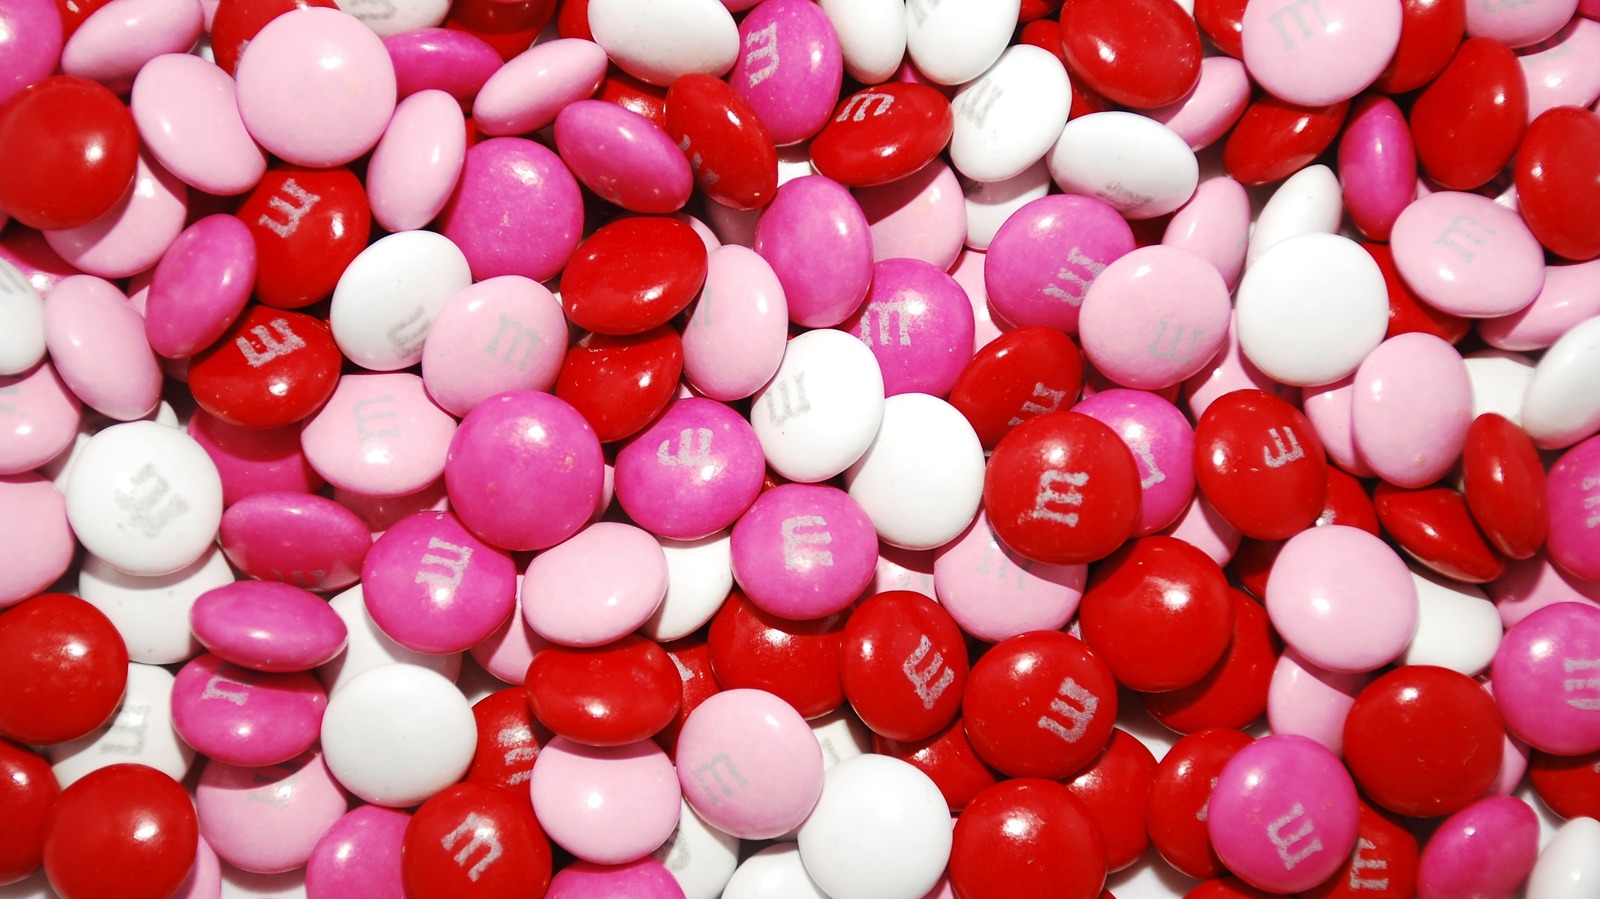 The Reason Pink And Red Candies Are Irresistible, According To Science